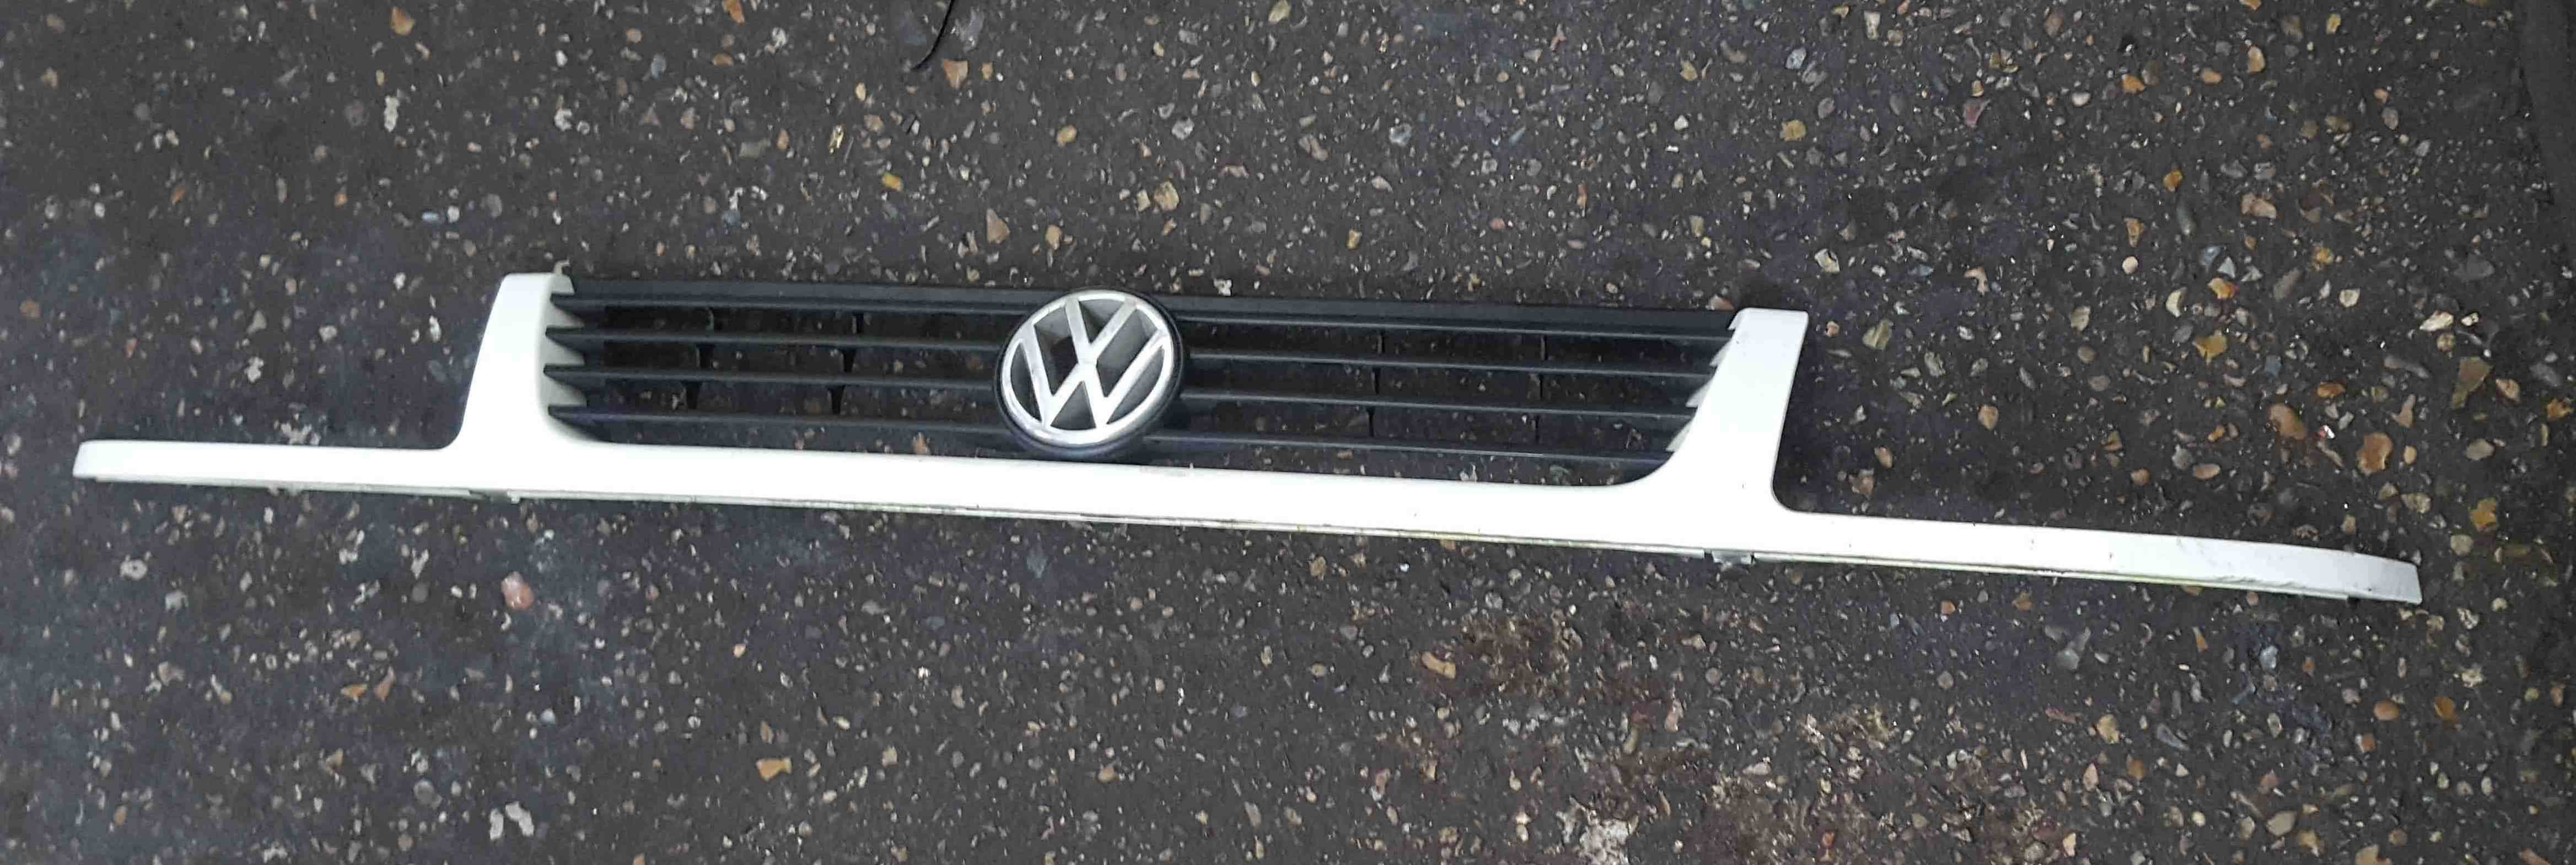 Volkswagen Caddy 1996-2004 Front Grill Grille White L90E 6K5853654D